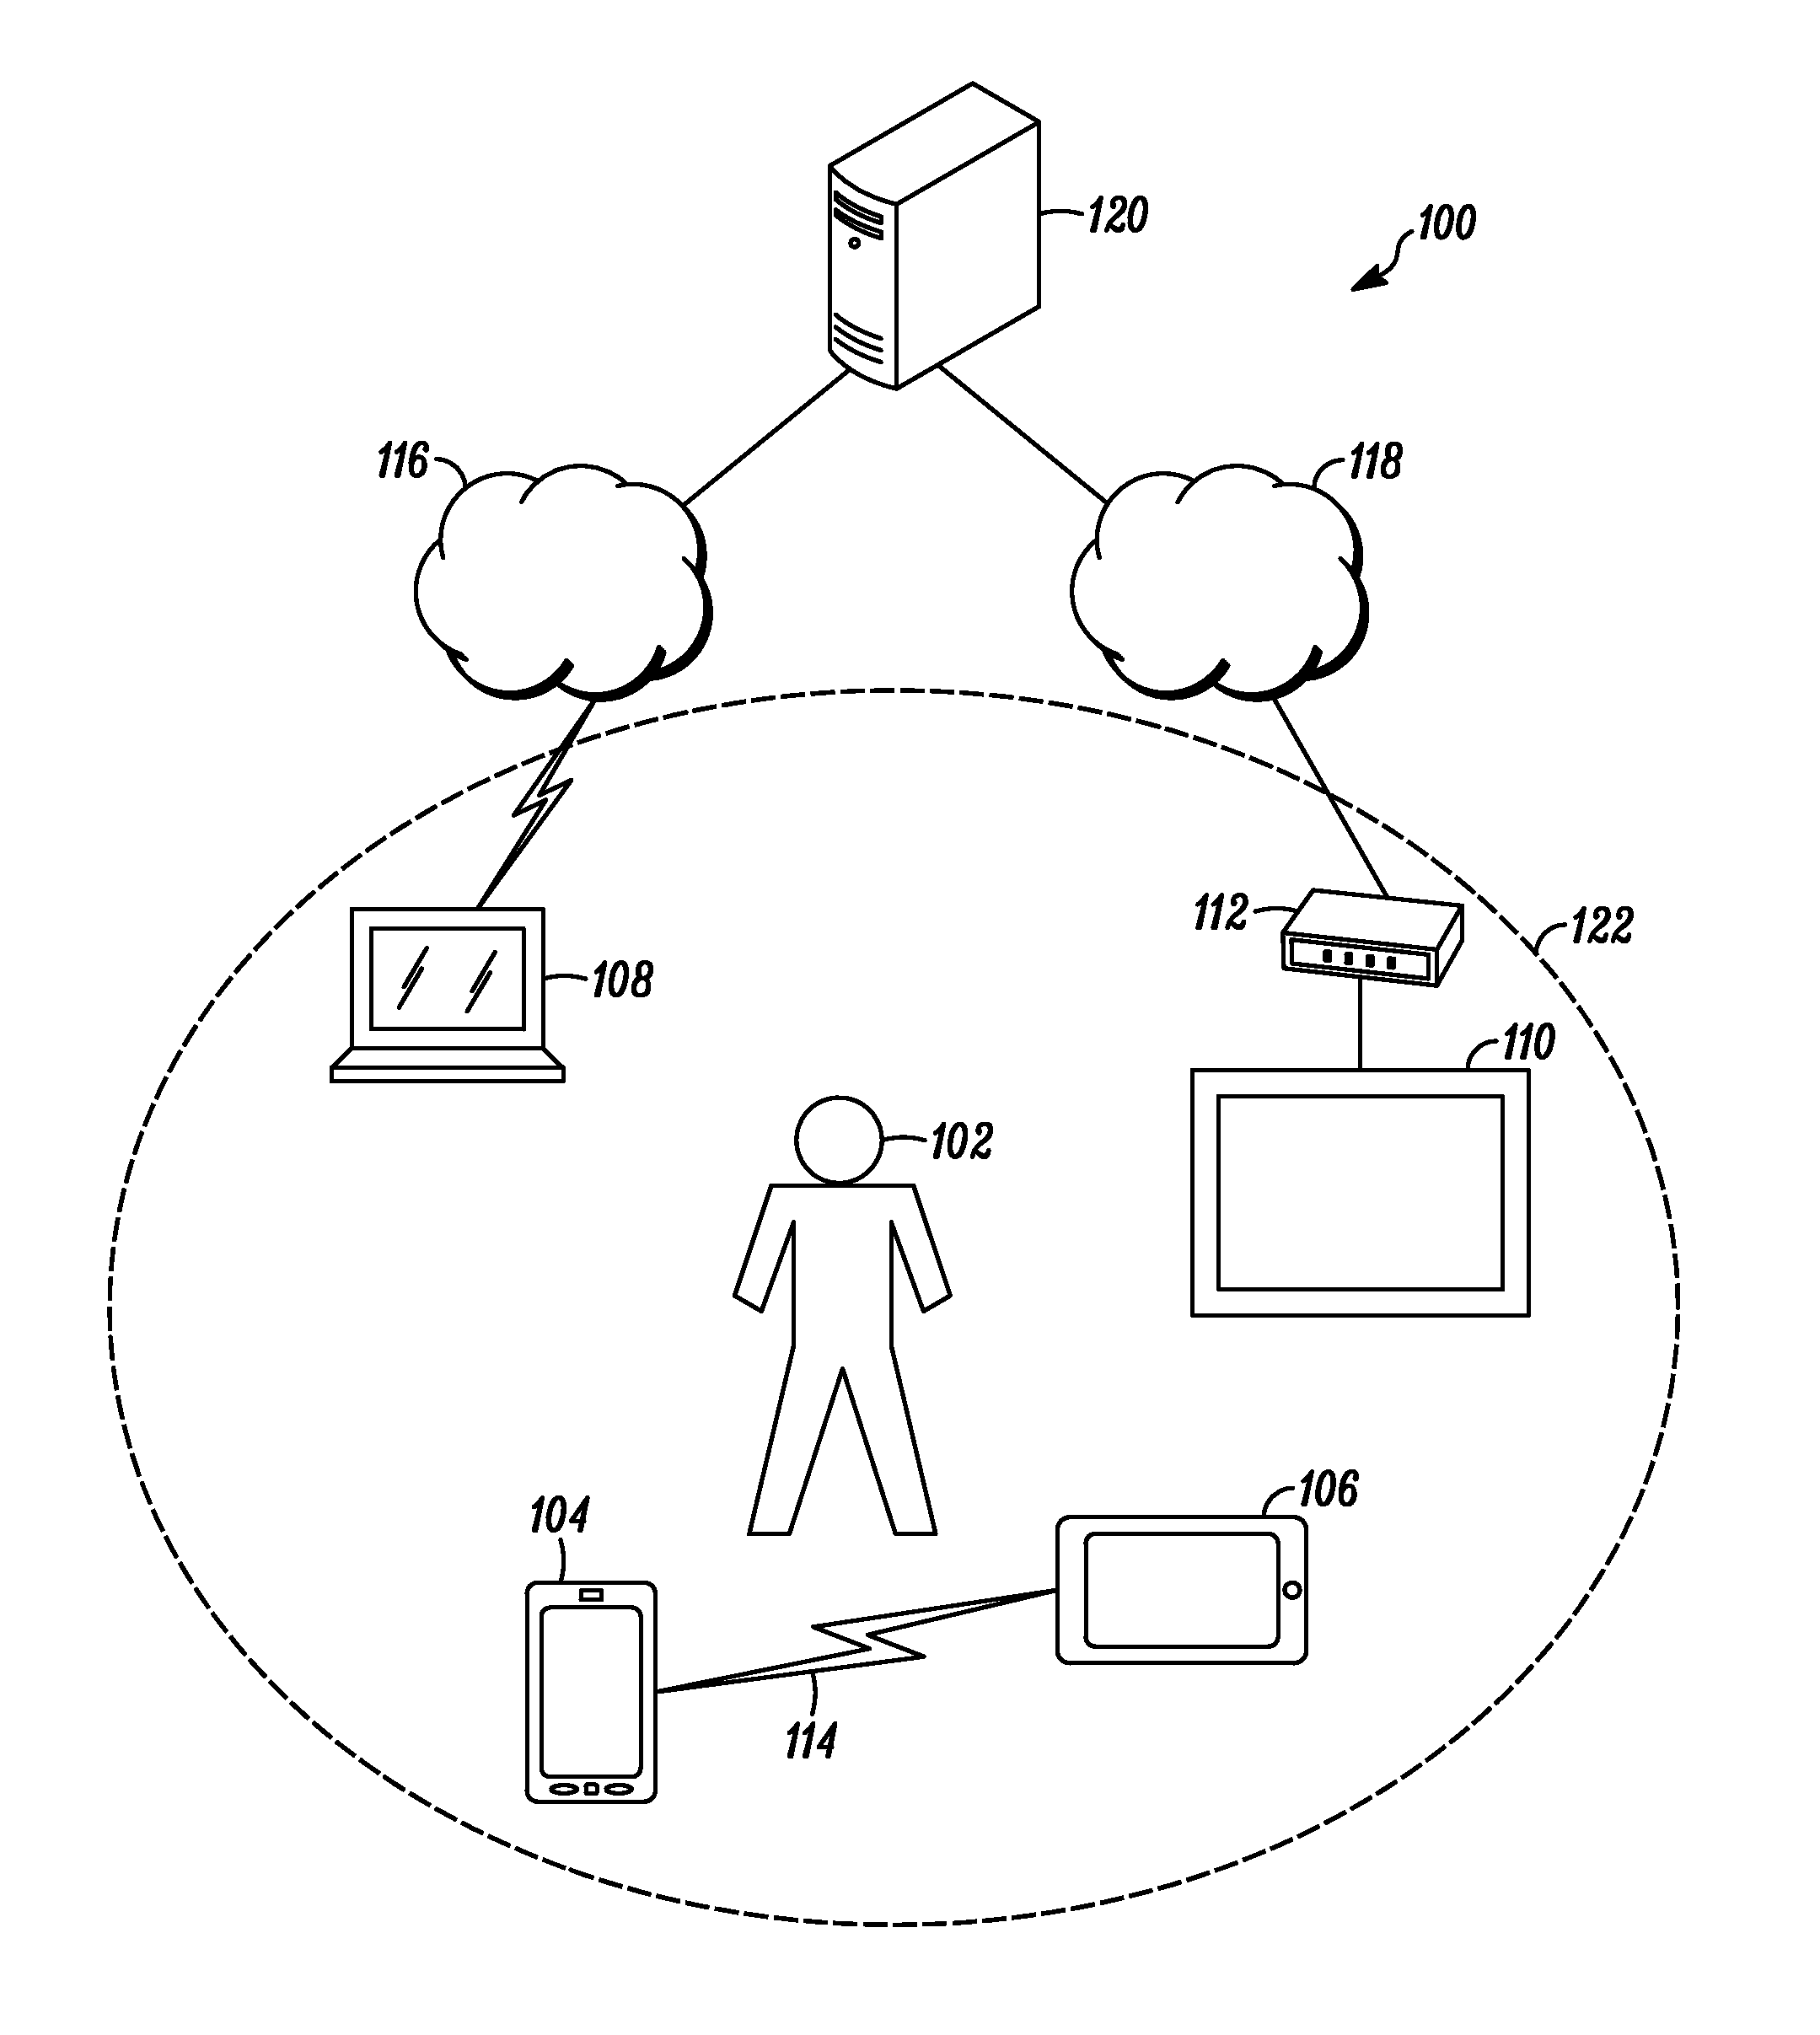 Methods for coordinating communications between a plurality of communication devices of a user